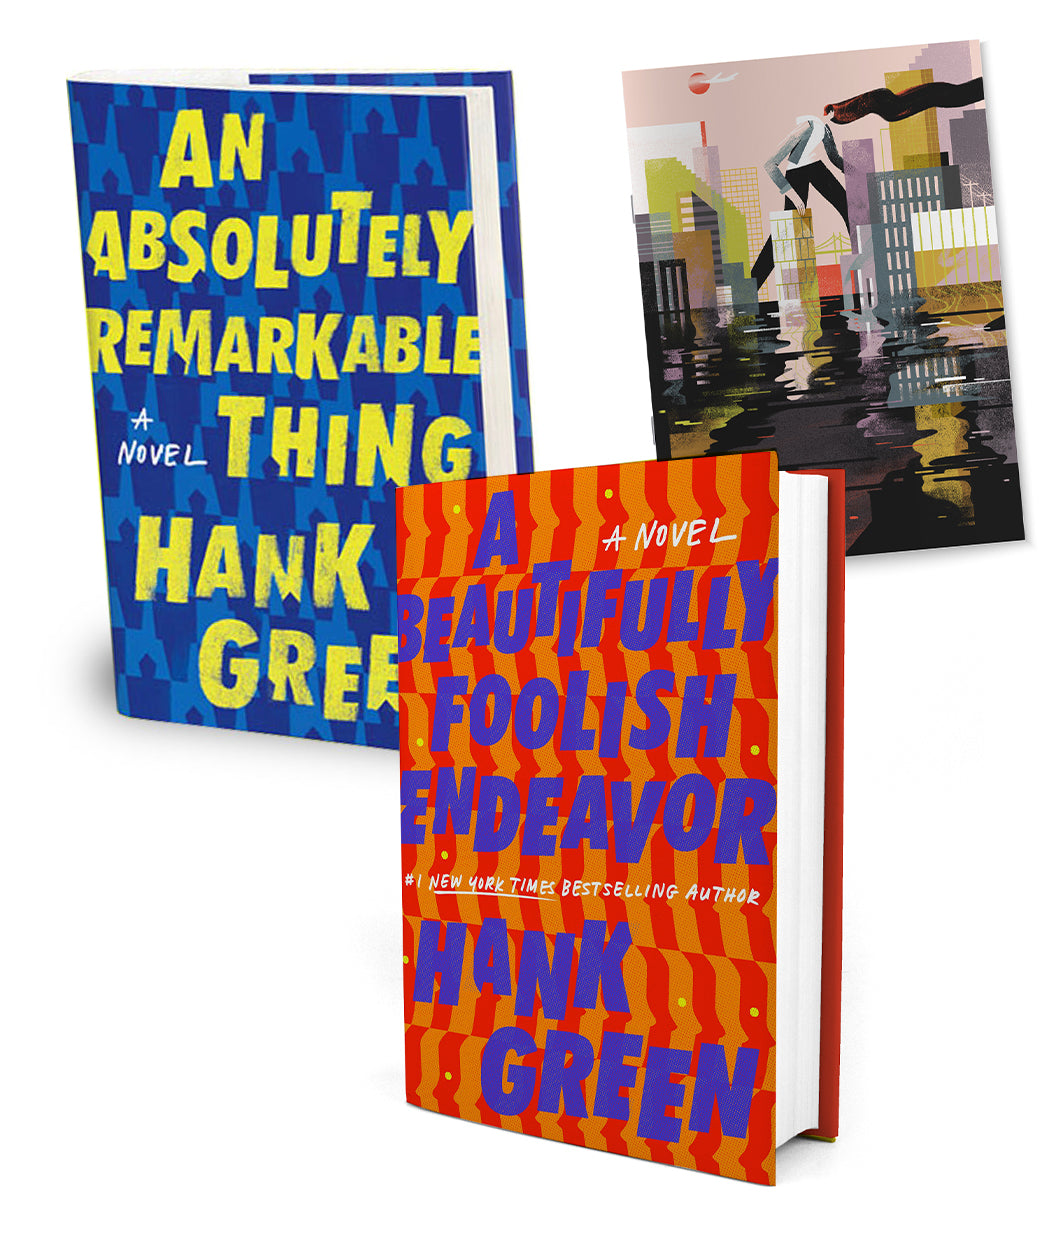 3 books on a white background: the hardcover An Absolutely Remarkable Thing has yellow text with a blue background; hardcover A Beautifully Foolish Endeavor has purple text and an orange and red background, and a slim booklet with a cubist illustration of a giant person walking through a watery city.